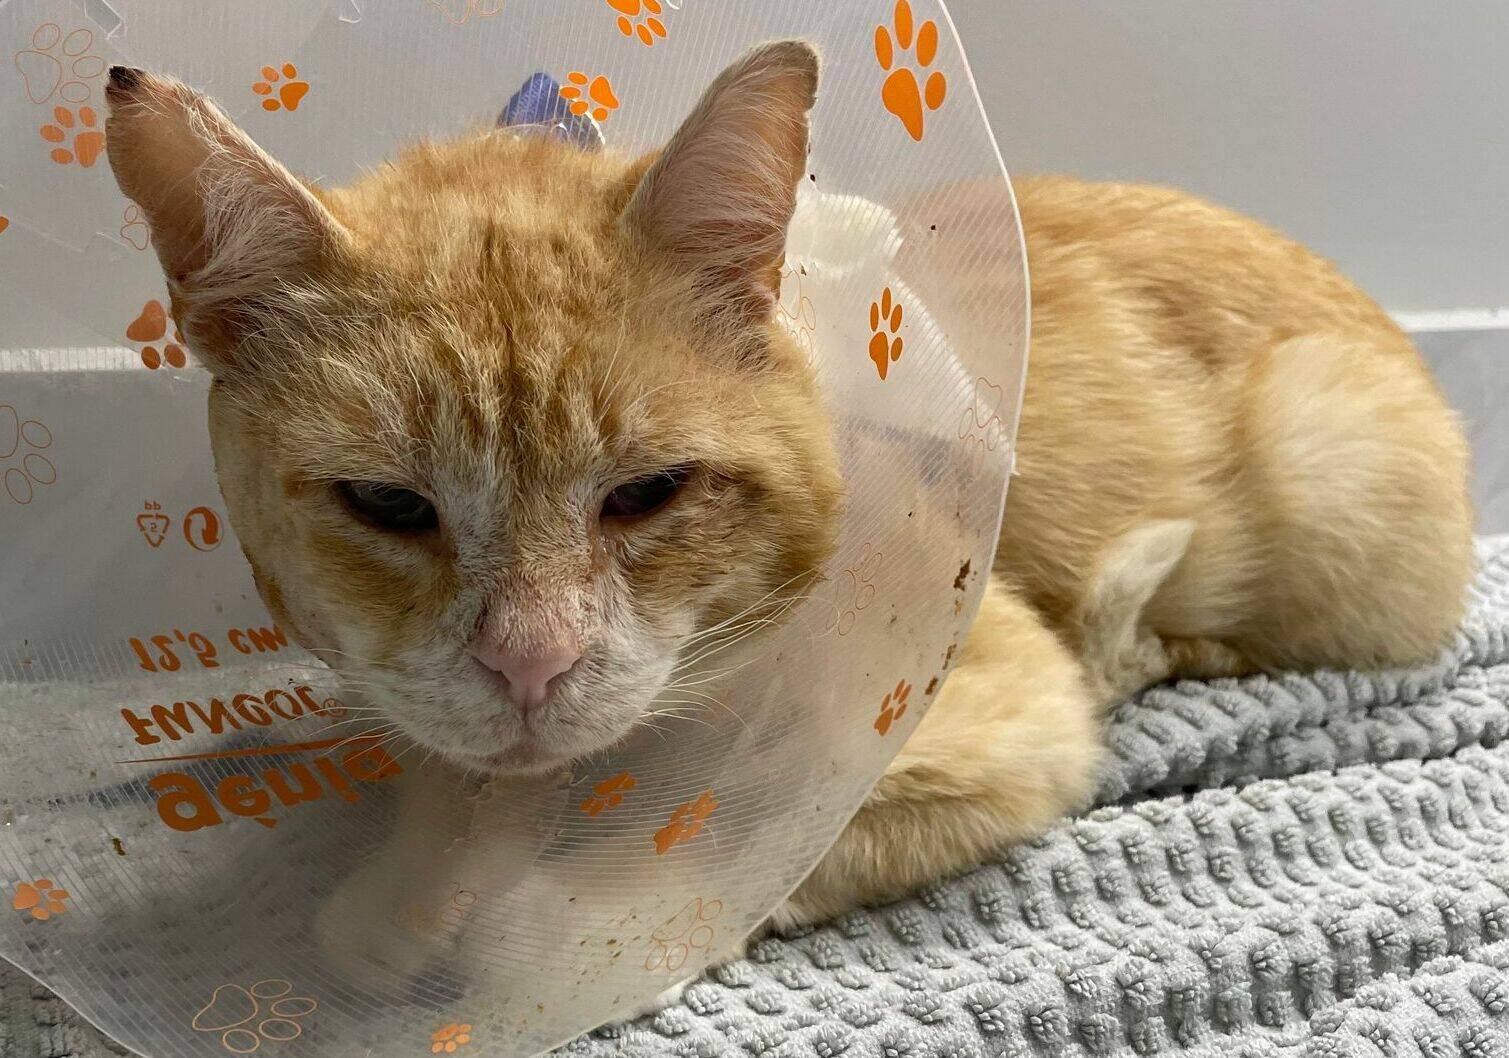 Edward the cat is in the care of the Prince Rupert SPCA after people found him wandering the streets with an open wound. (Contributed photo)